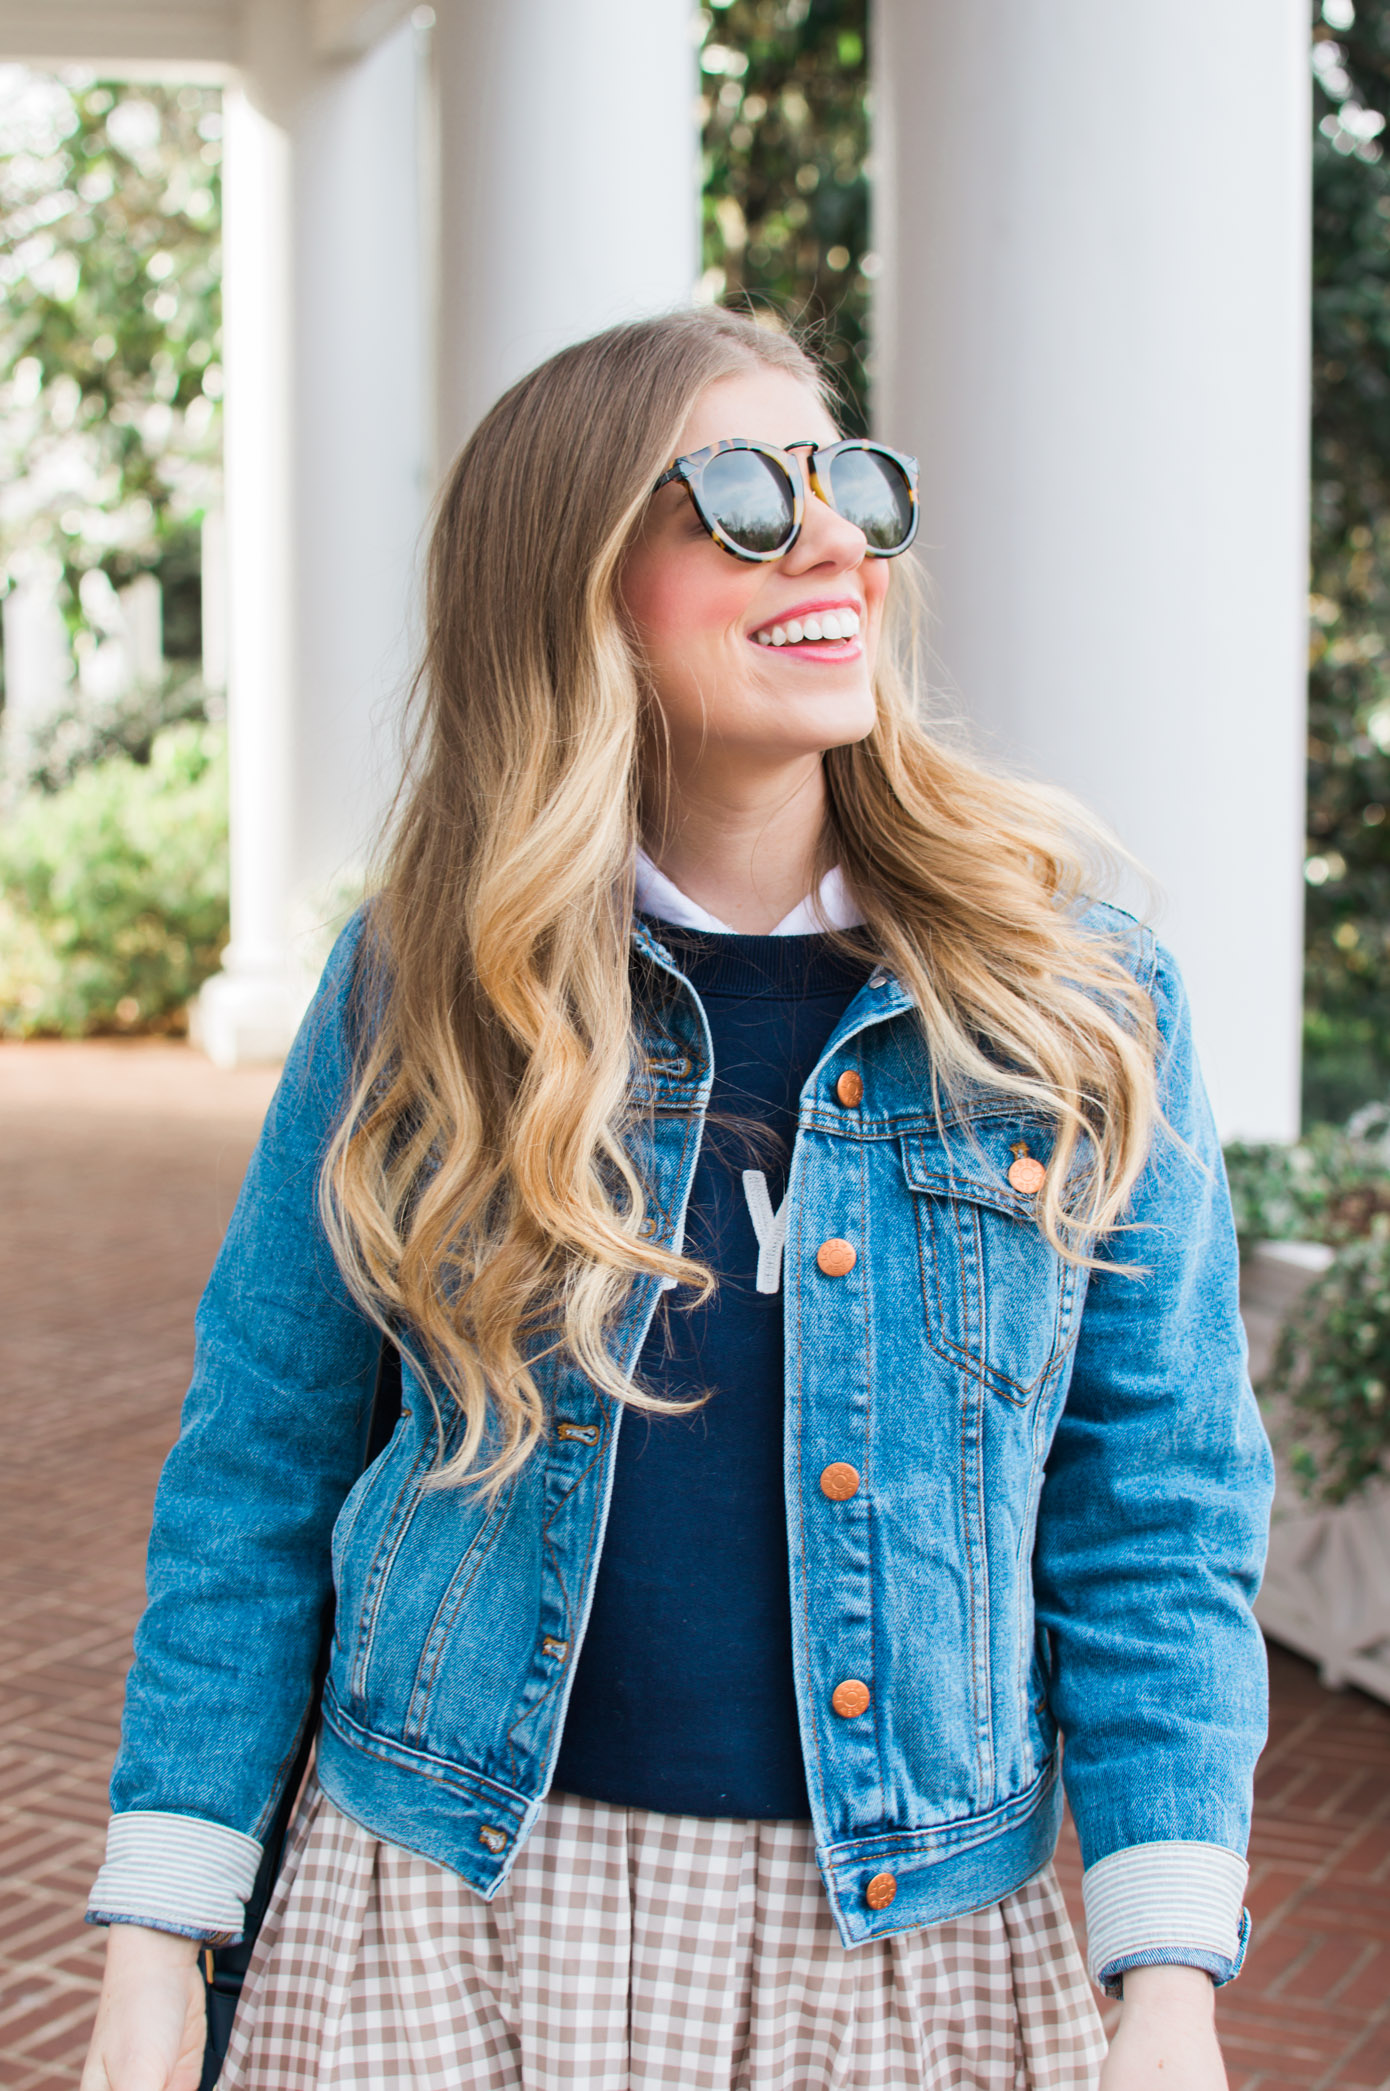 How to Style a Maxi Skirt for Winter | The Perfect Denim Jacket | Louella Reese Life & Style Blog